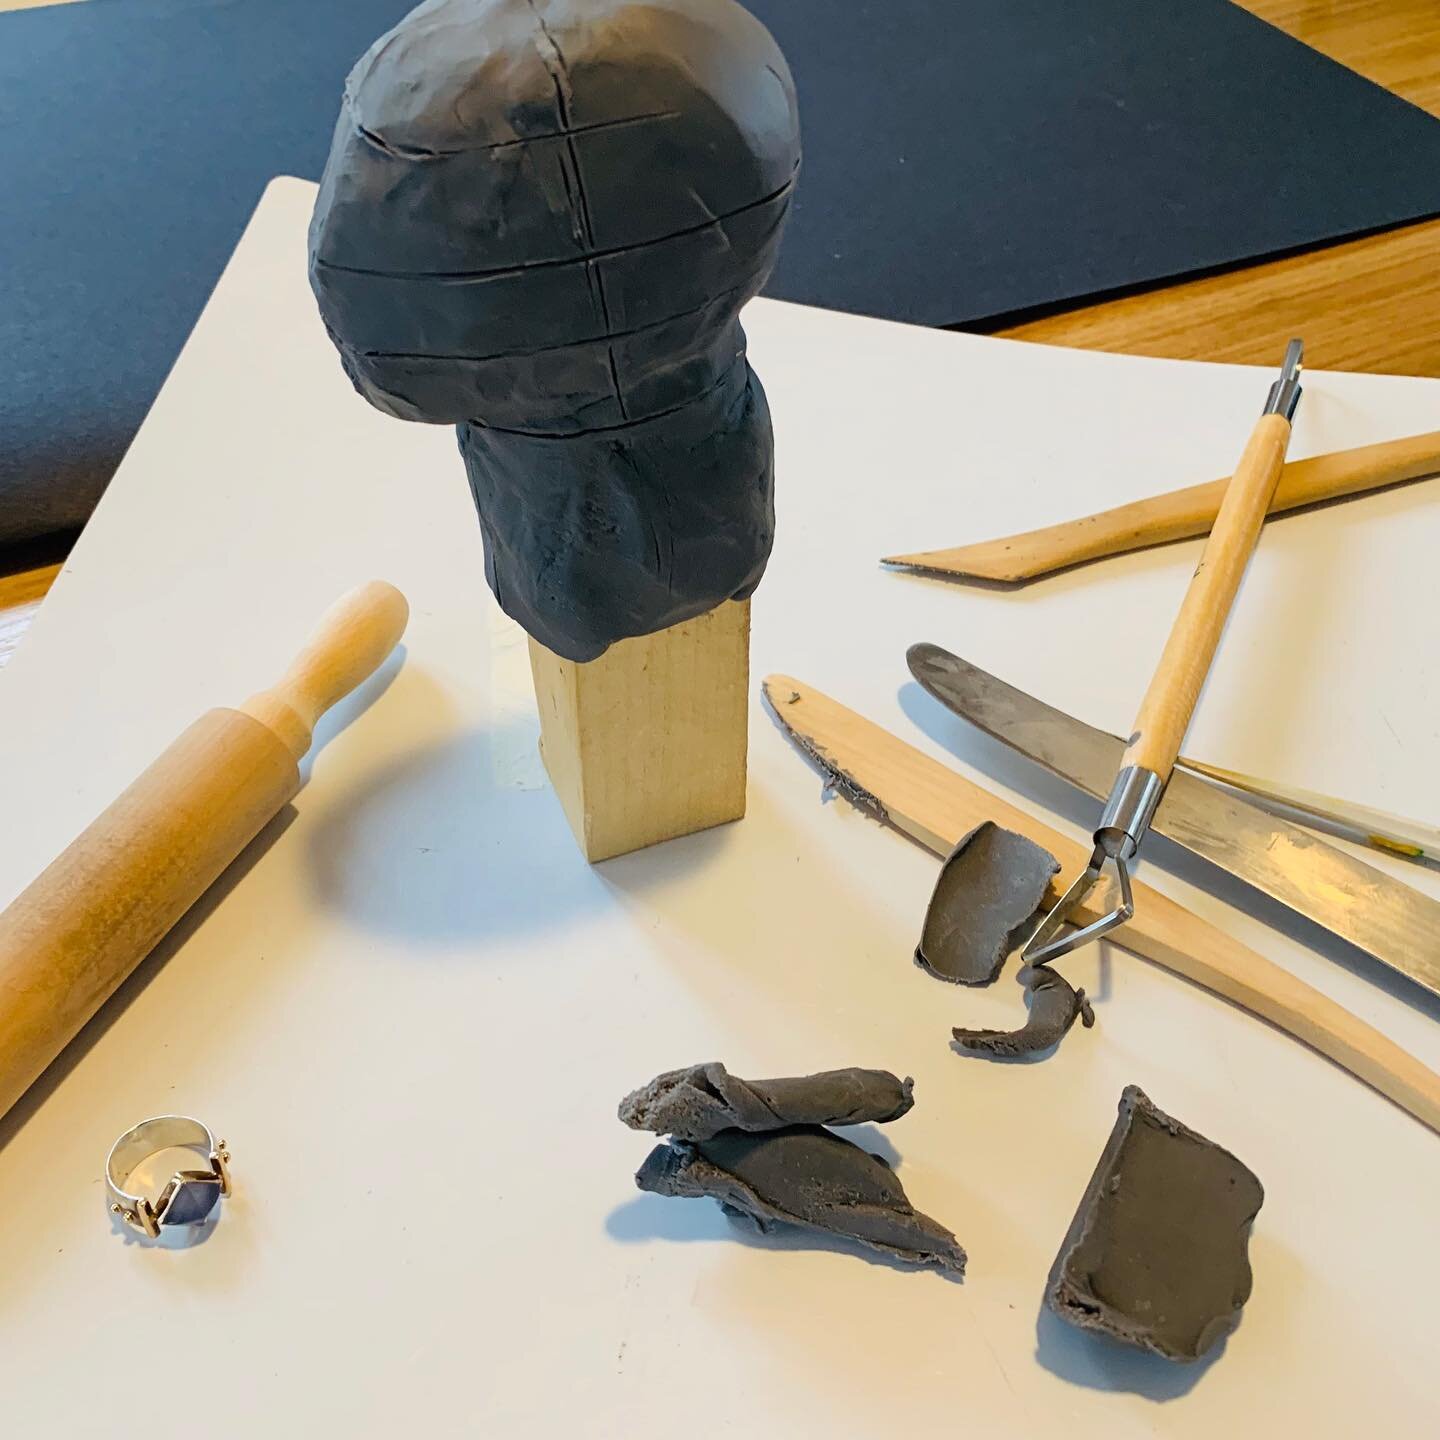 And so , the next creation begins. Time to get back to the sculpting studio. First step: creating a maquette and working out the proportions in plasticine before taking to wood and gouges. 
A human likeness is still far away, but the learning process